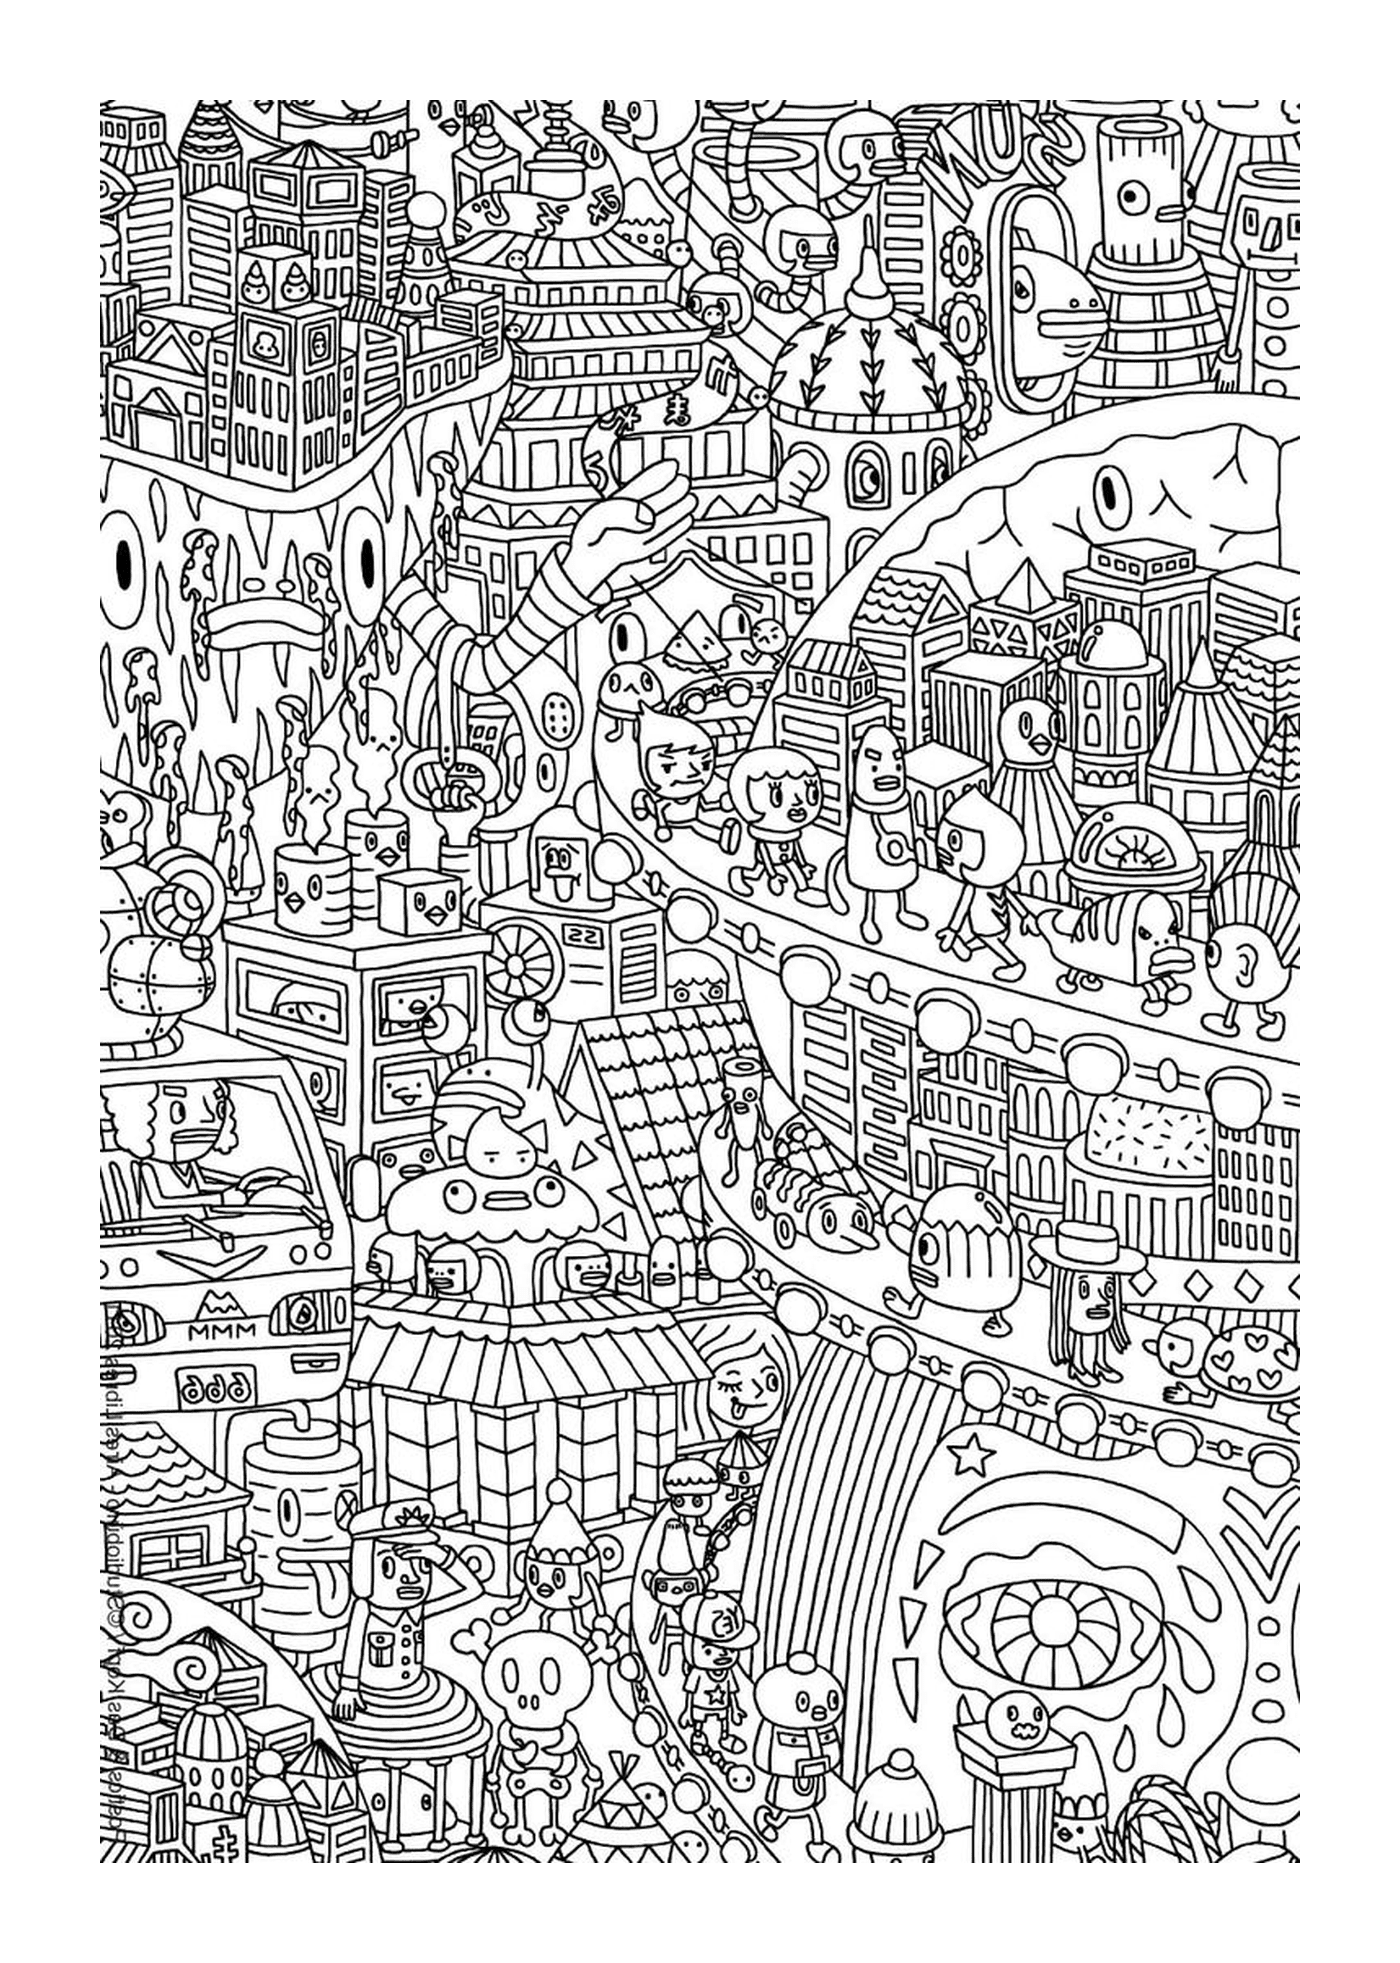  Drawing of a city 